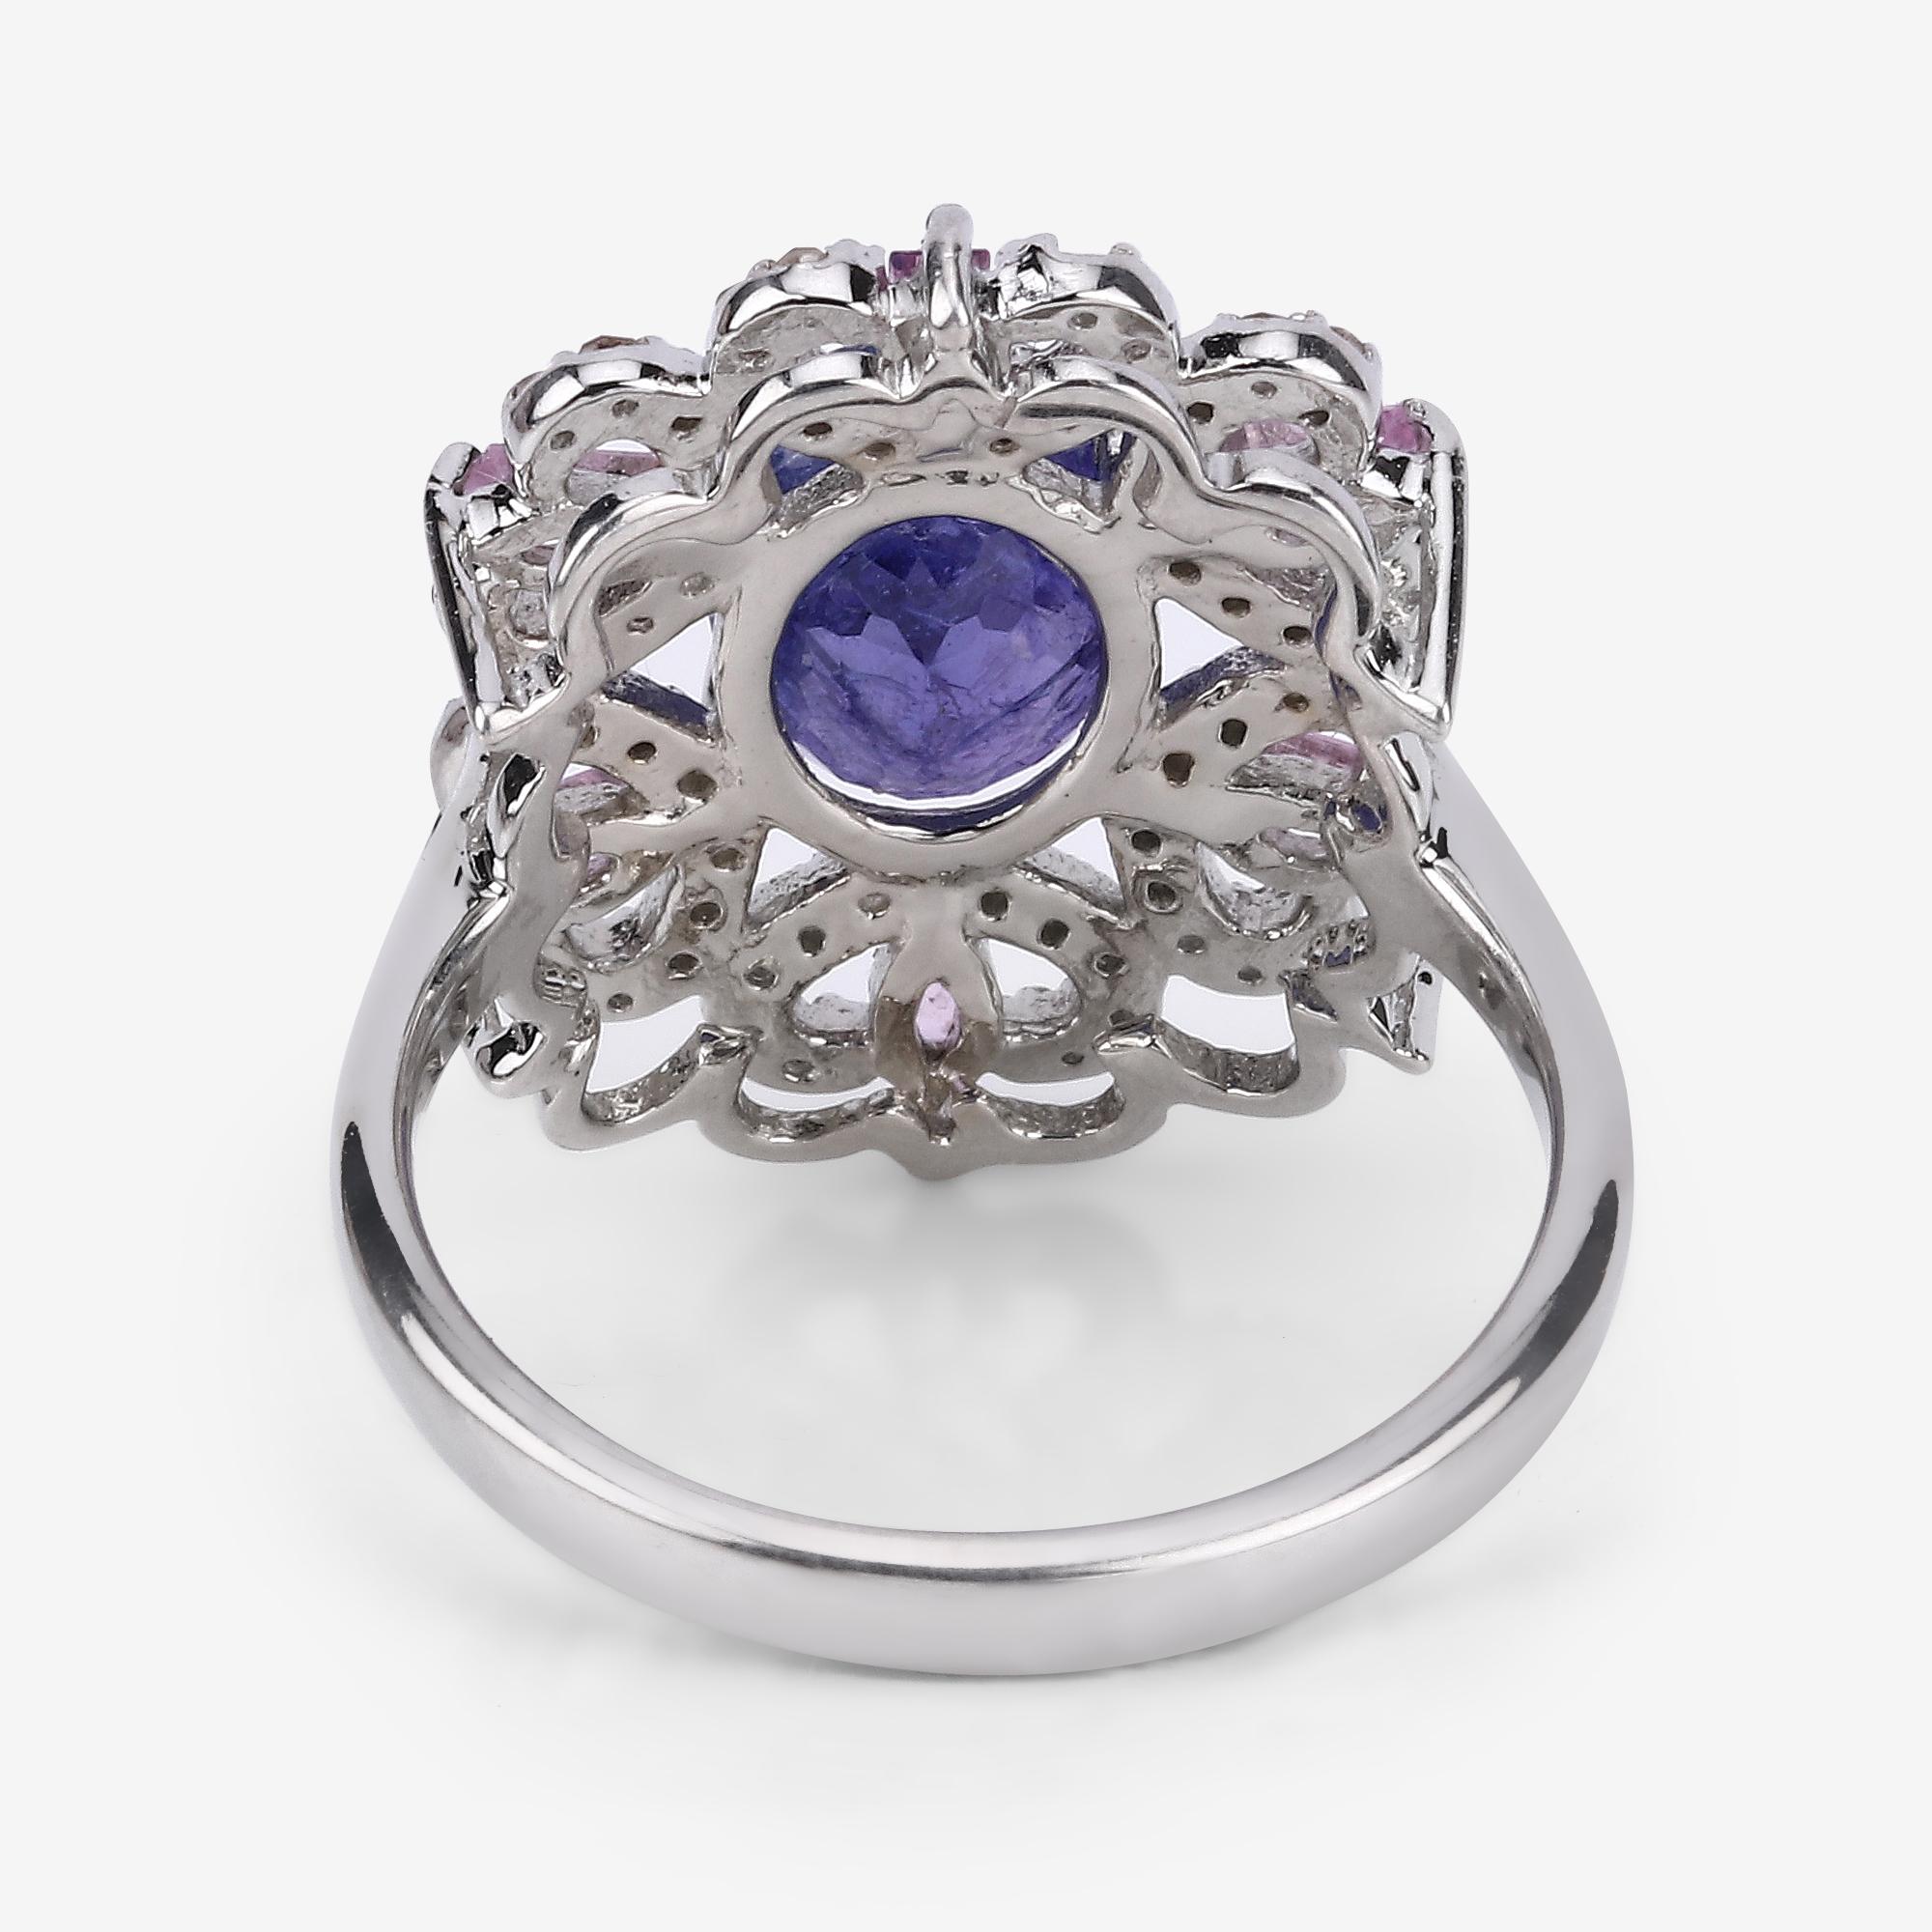 3.01cttw Tanzanite, Pink Sapphires with Diamonds 0.41cttw Sterling Silver Ring

A ring fit for a queen. Adorn your outfits with its funky flair when you wear this vintage inspired celebrity style ring, featuring 3.01 ct. t.w. oval-cut tanzanite,